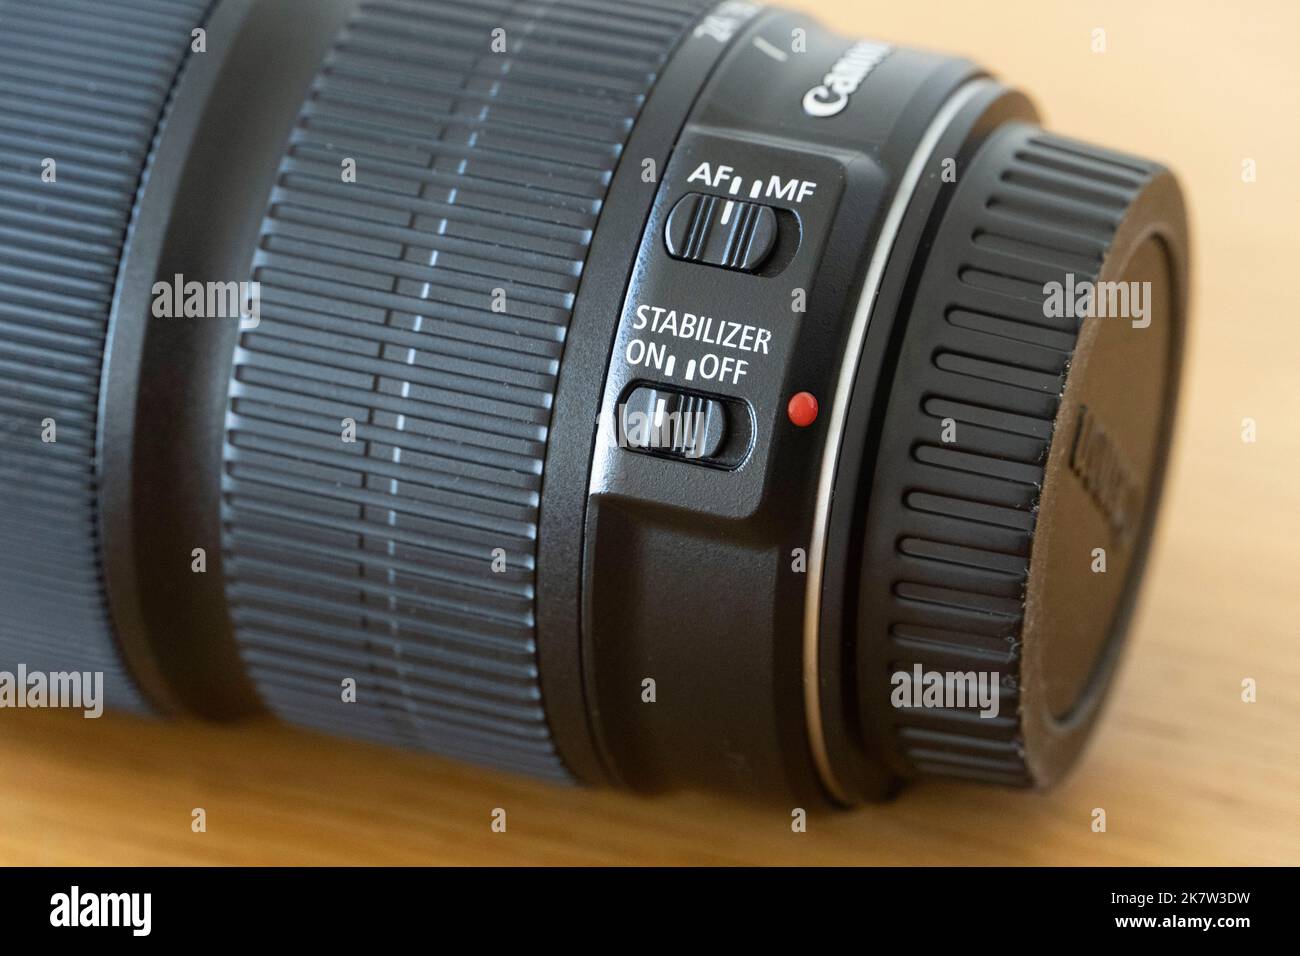 Close up of Image Stabilizer switch and AF/MF switch on a Canon 24-105mm zoom lens Stock Photo